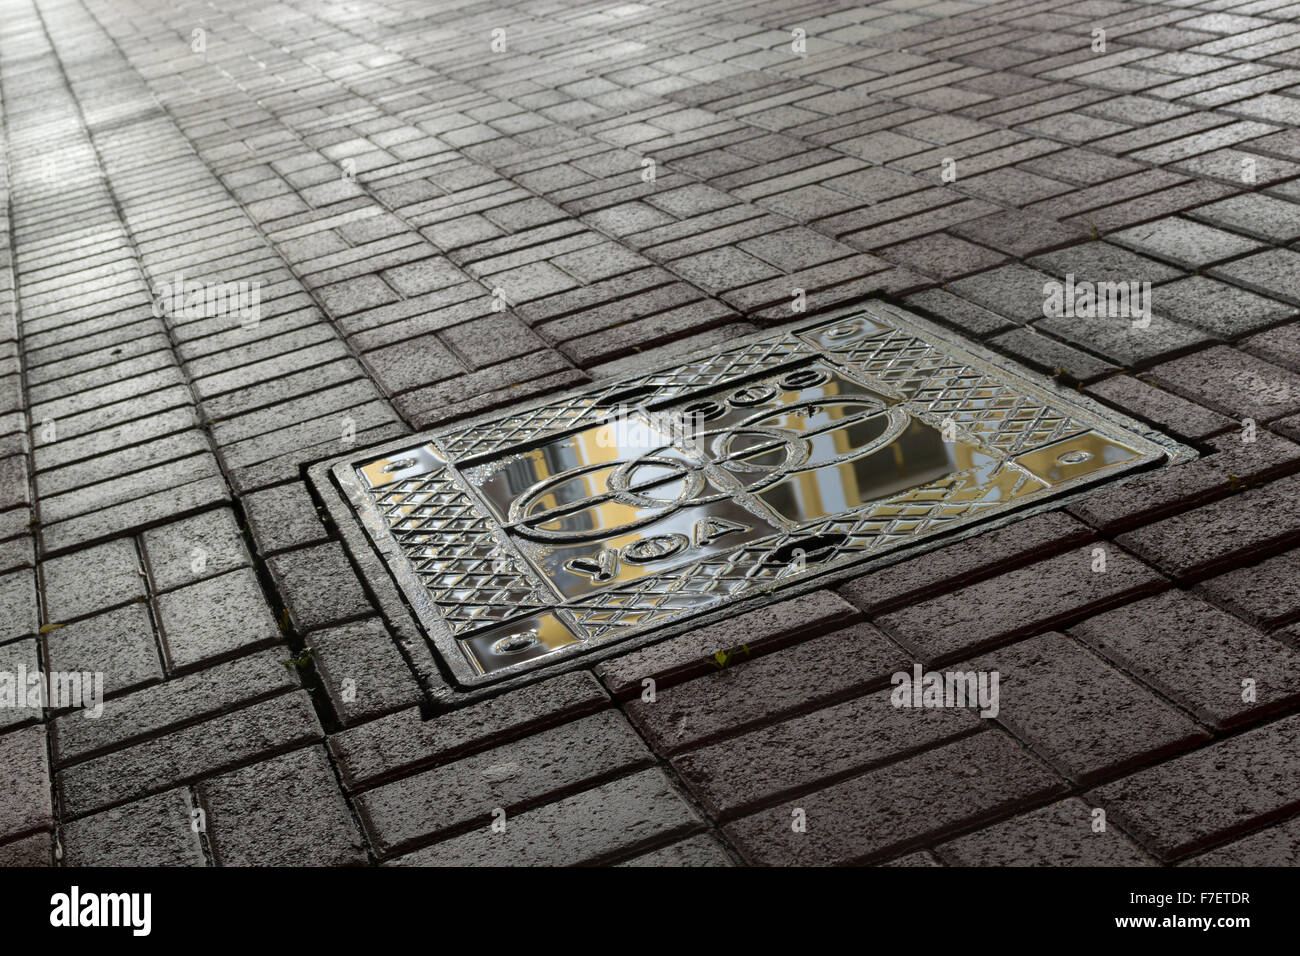 Neon light bounces off of a manhole cover after a rain storm. This image was taken in Ufa Russia in October 2015. Monochrome Bla Stock Photo